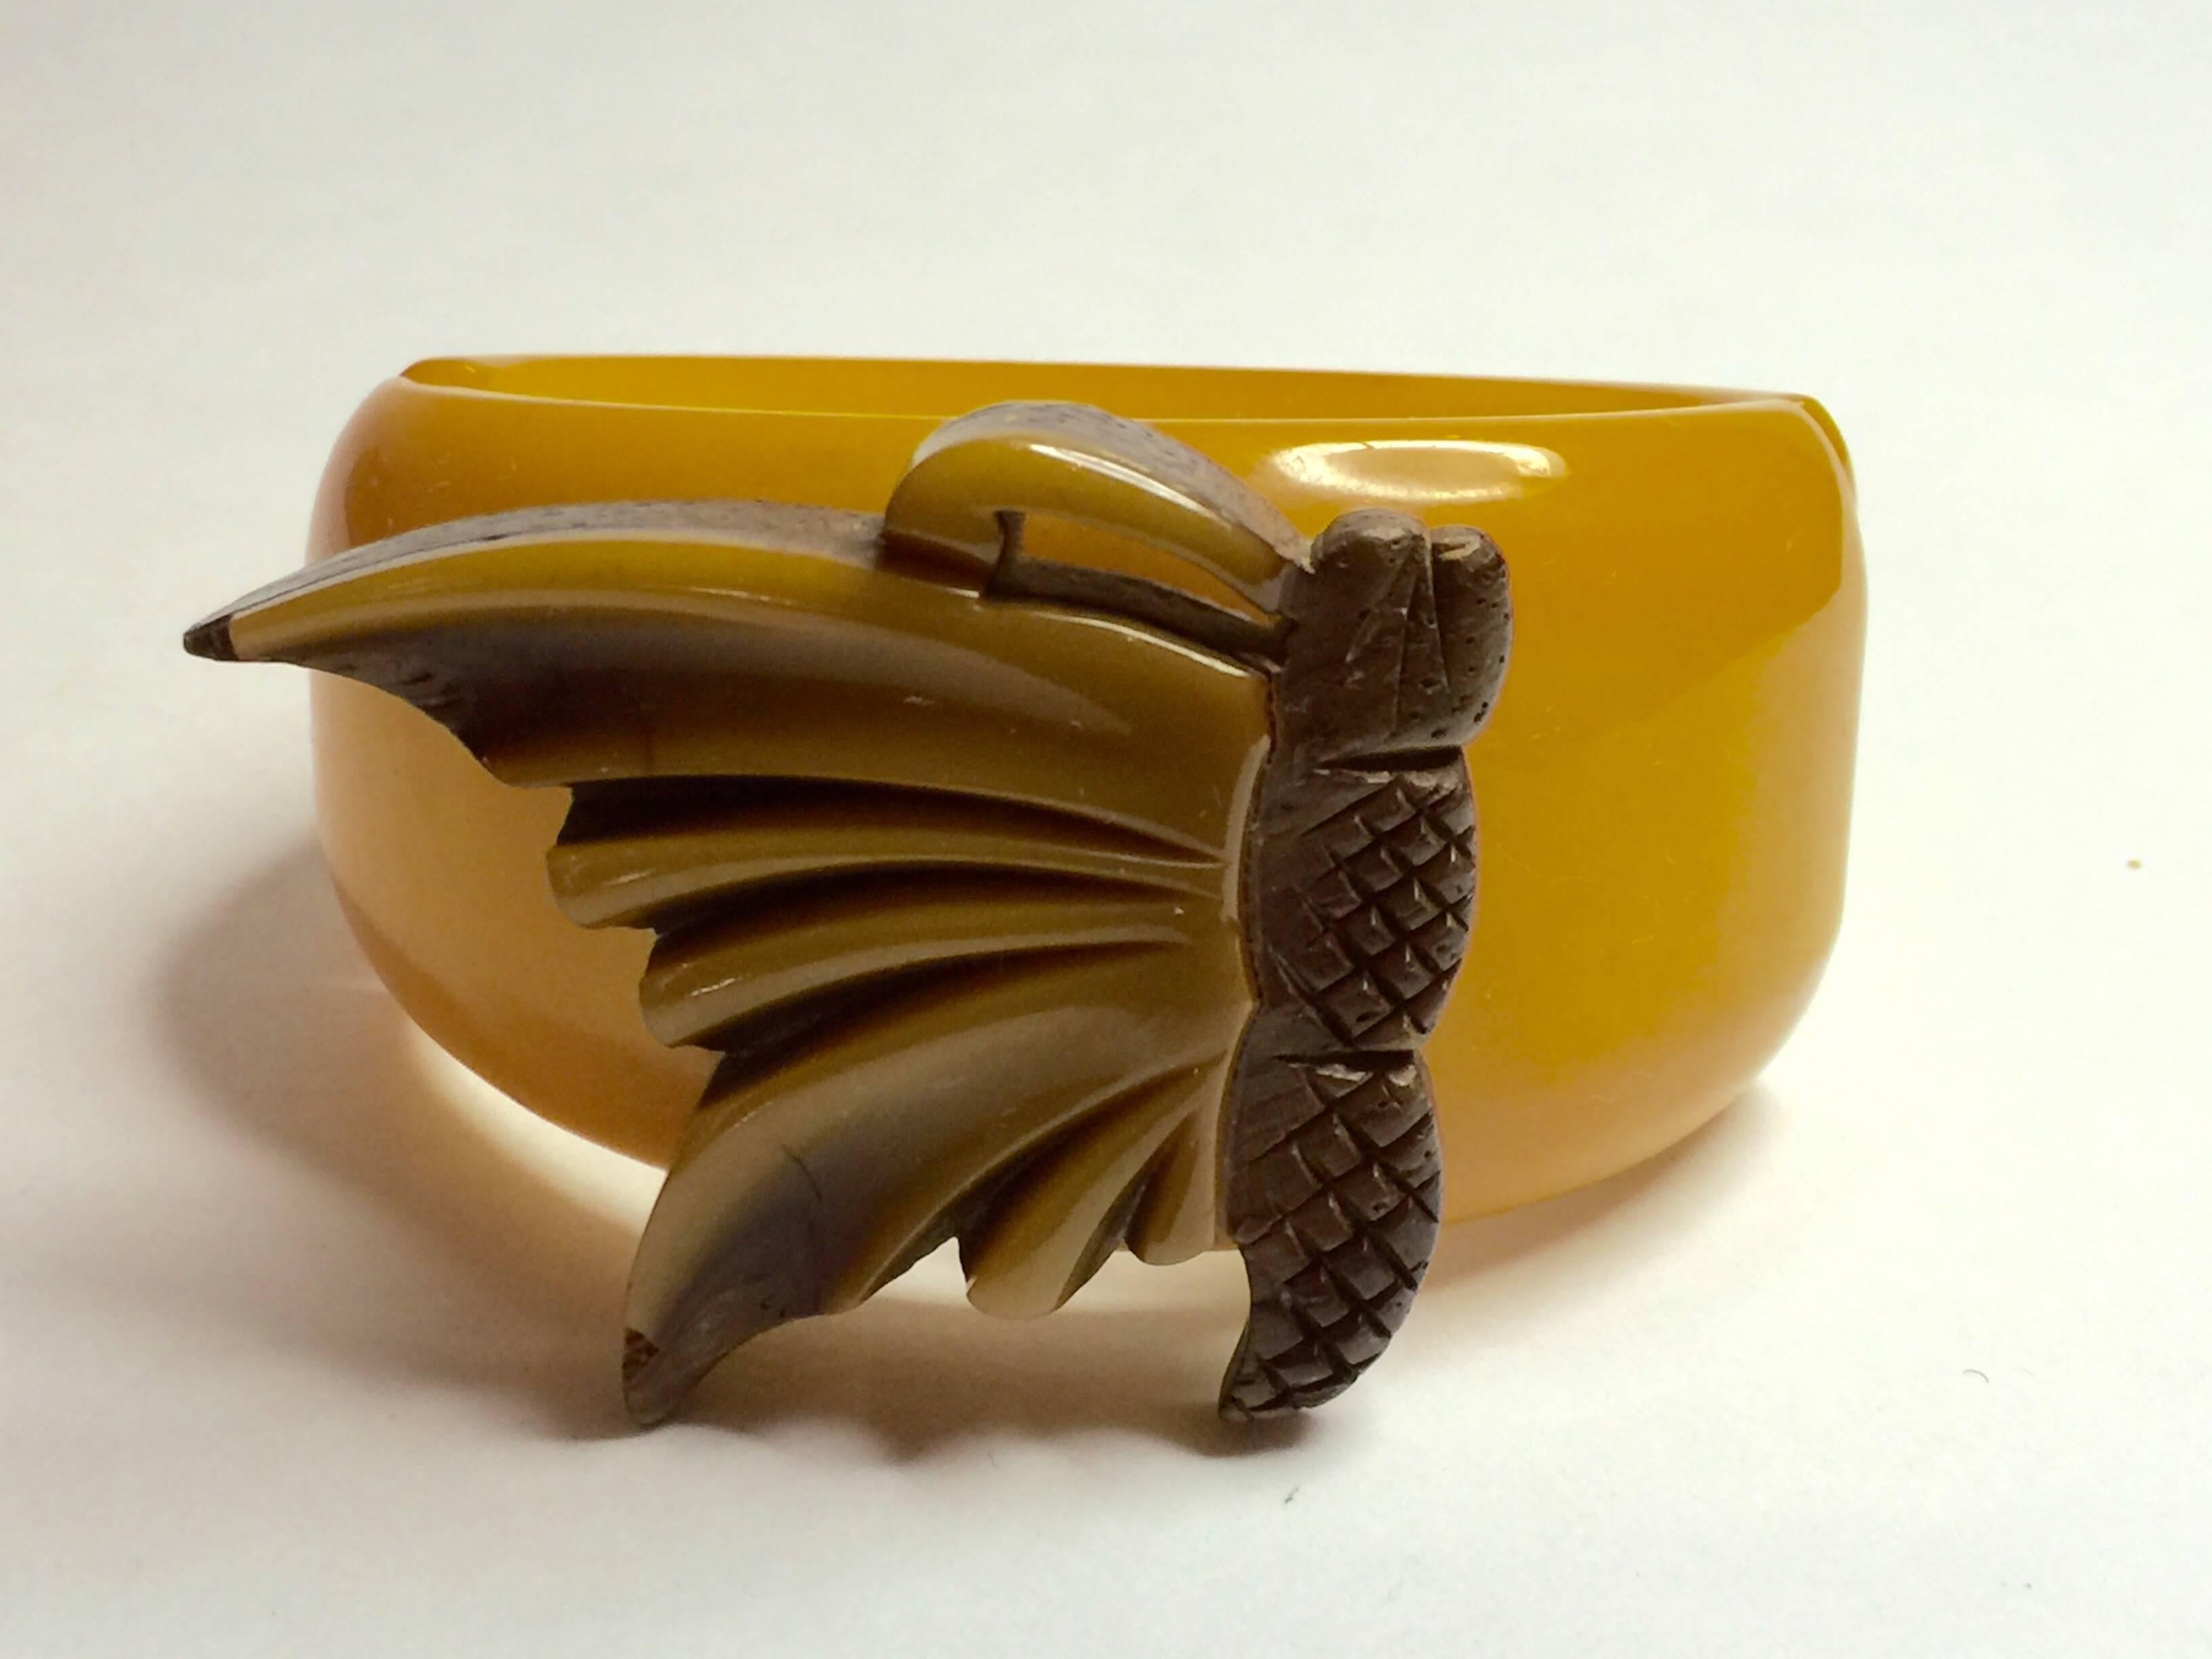 The always wearable side opening hinged bracelet with a laminated bakelite and wood butterfly on top, is a classic fun figural hinged bracelet of 1930s design and execution. A highly popular format indeed. Spring hinge opening allows hinged